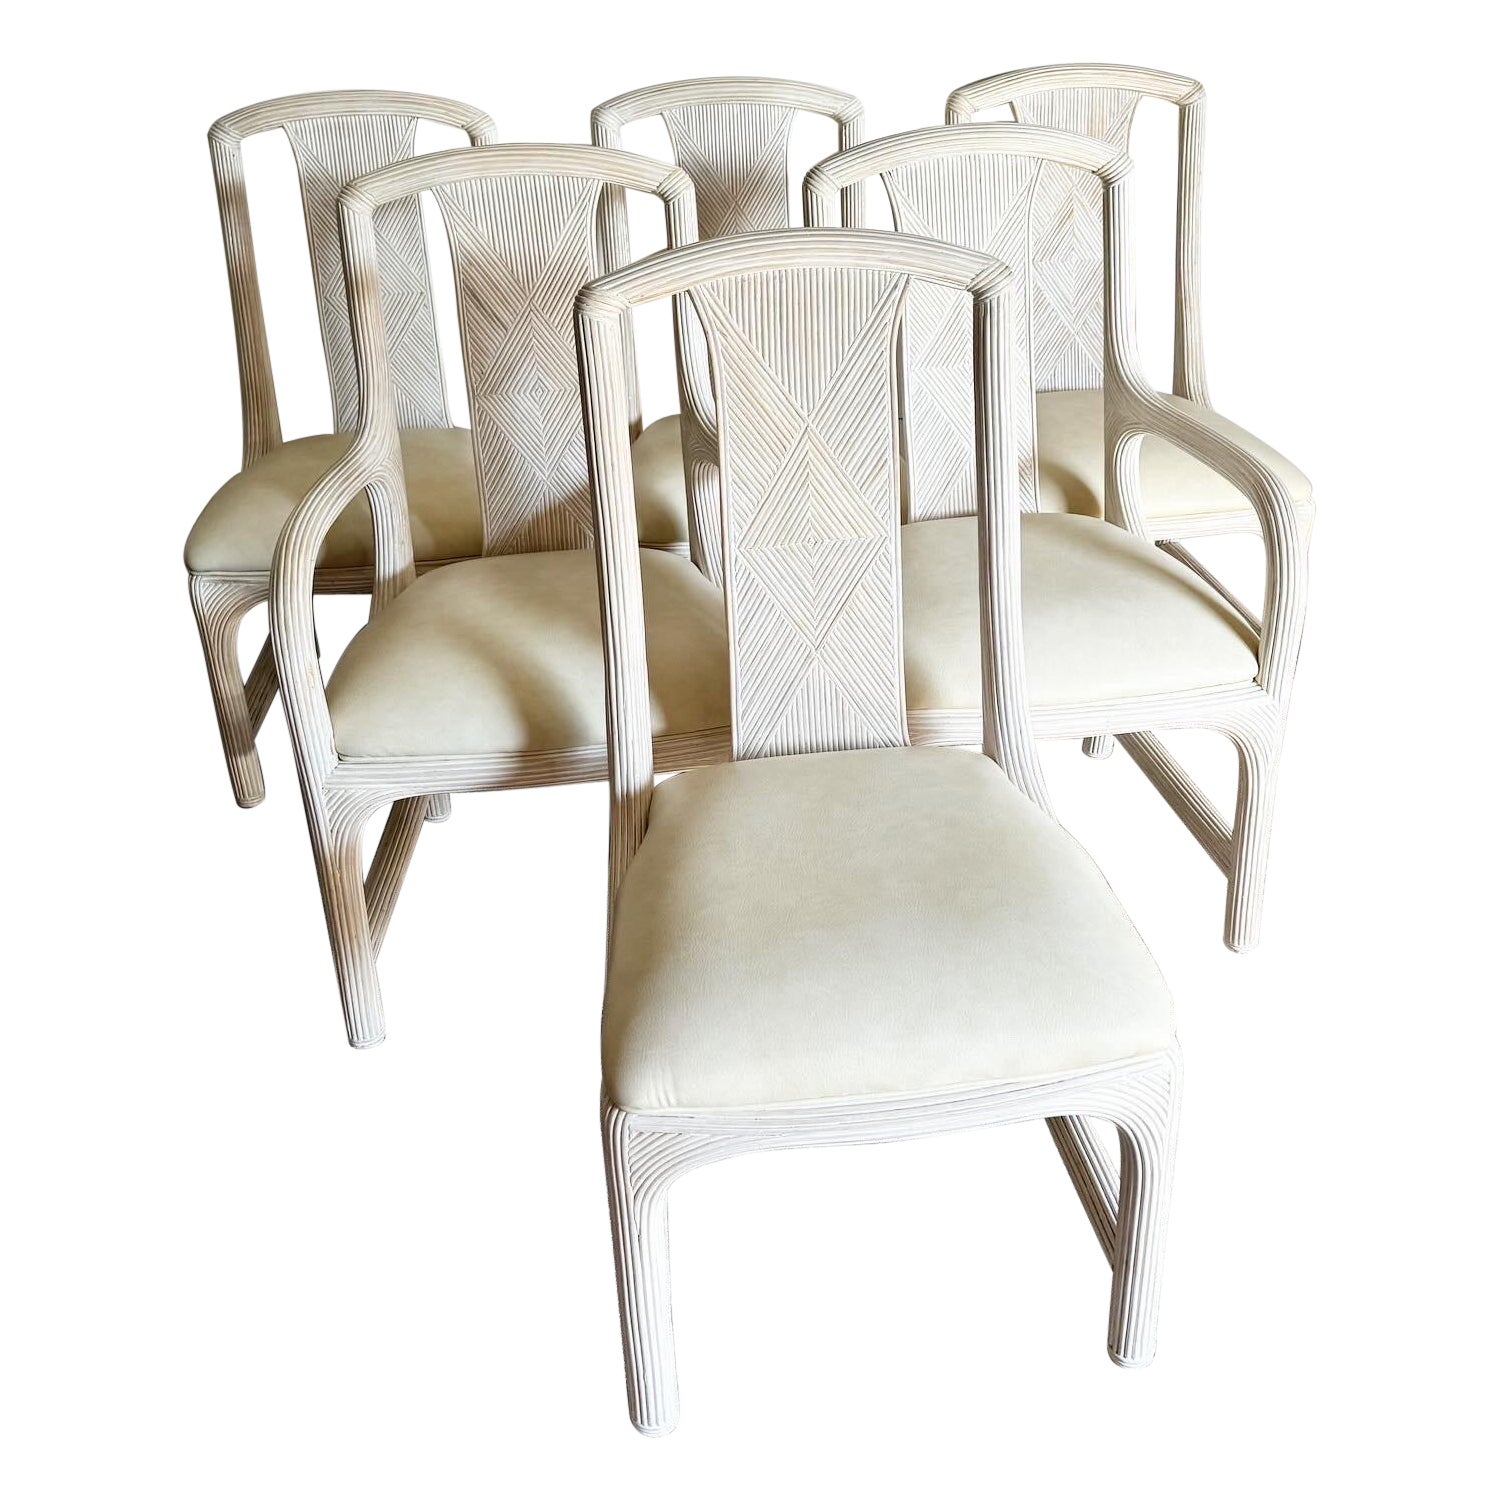 Boho Chic Pencil Reed Dining Chairs With Faux Leather Seat Cushions - Set of 6